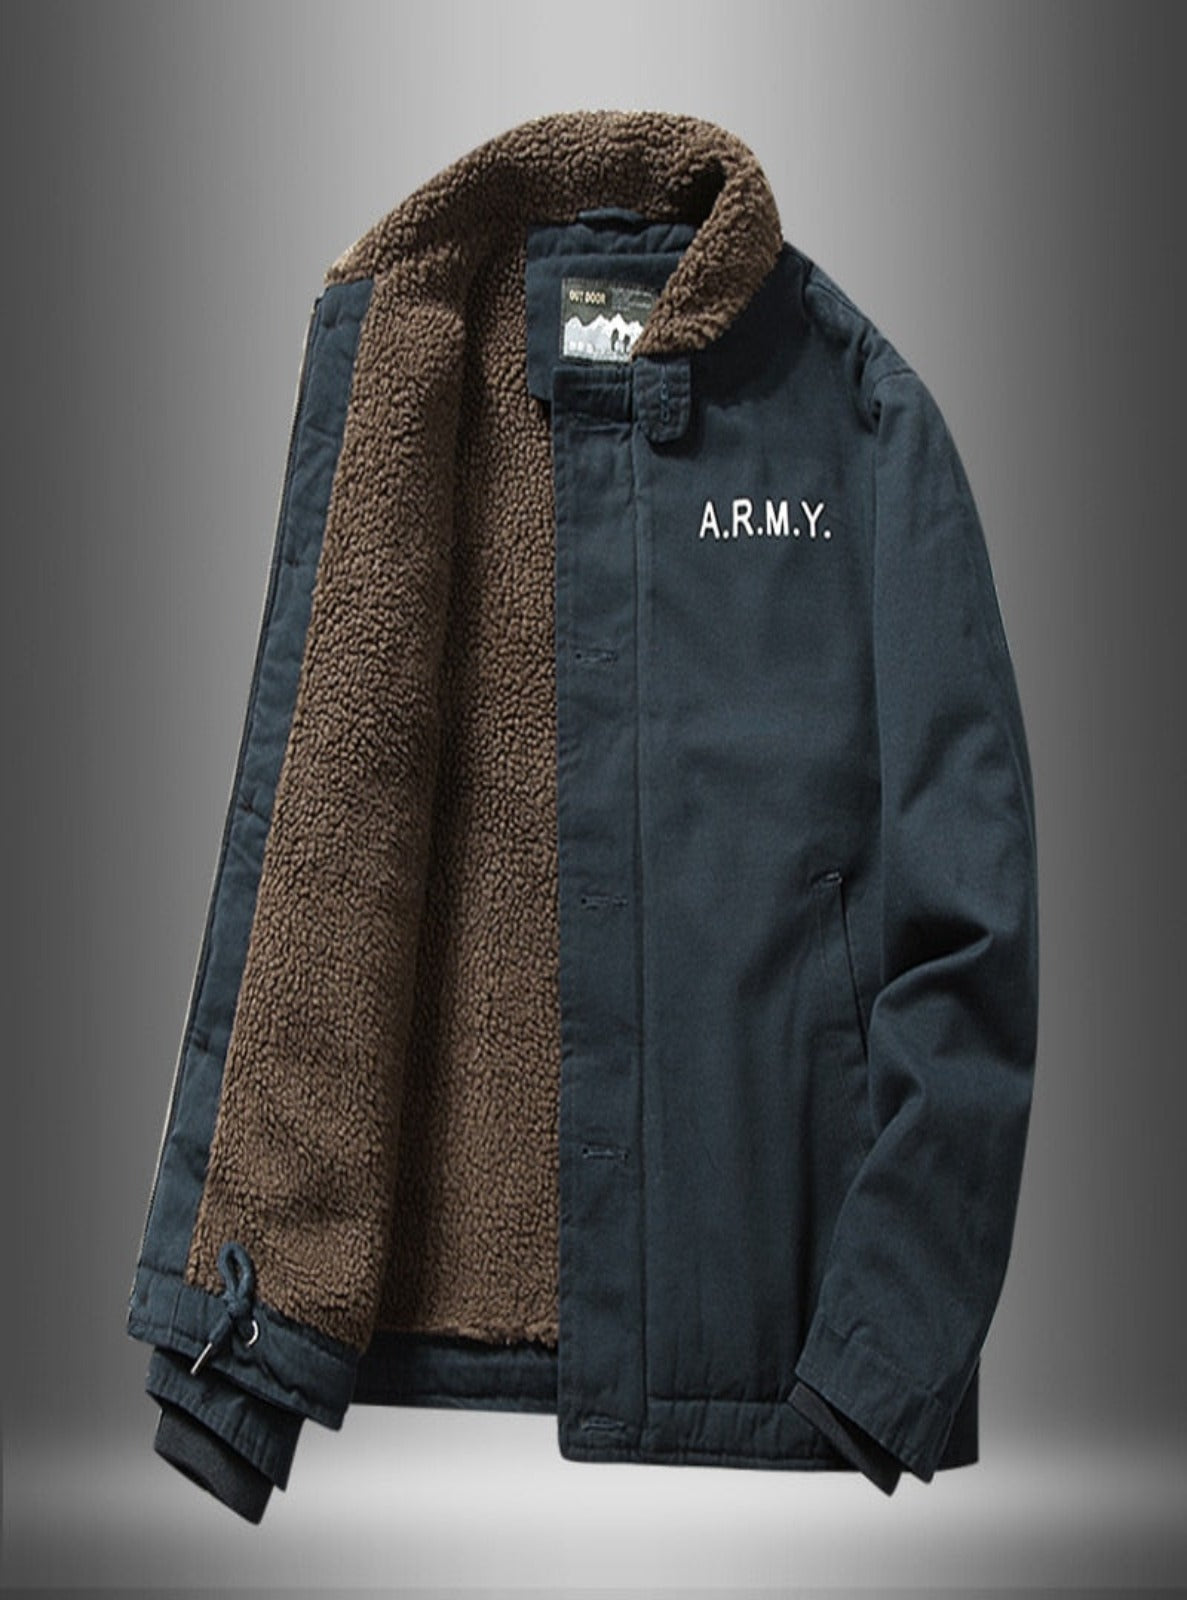 A.R.M.Y Cotton-Lined Bomber Jacket